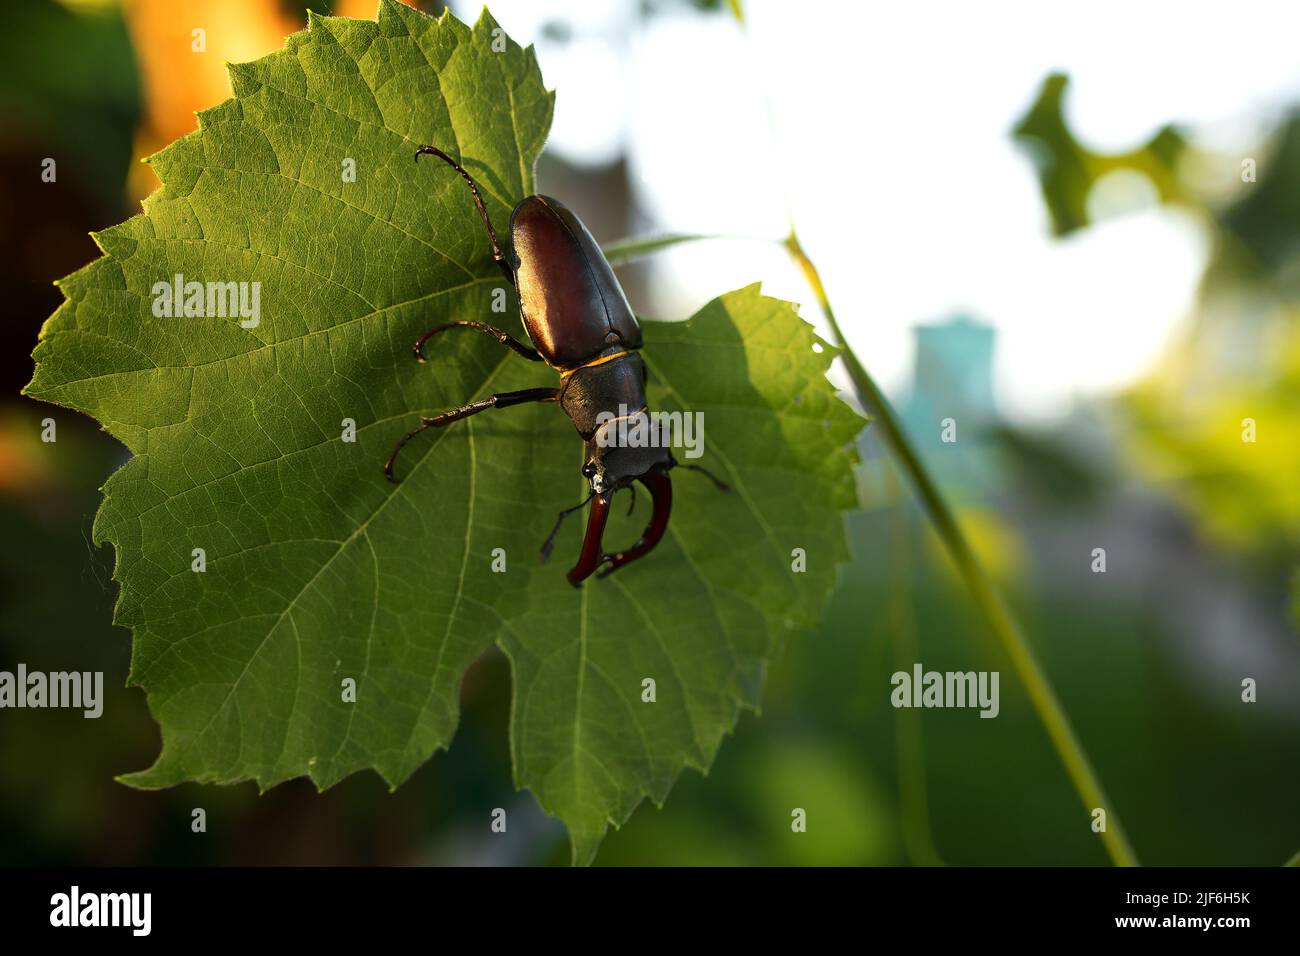 Horn beetle on a grape leaf. wildlife, insects Stock Photo